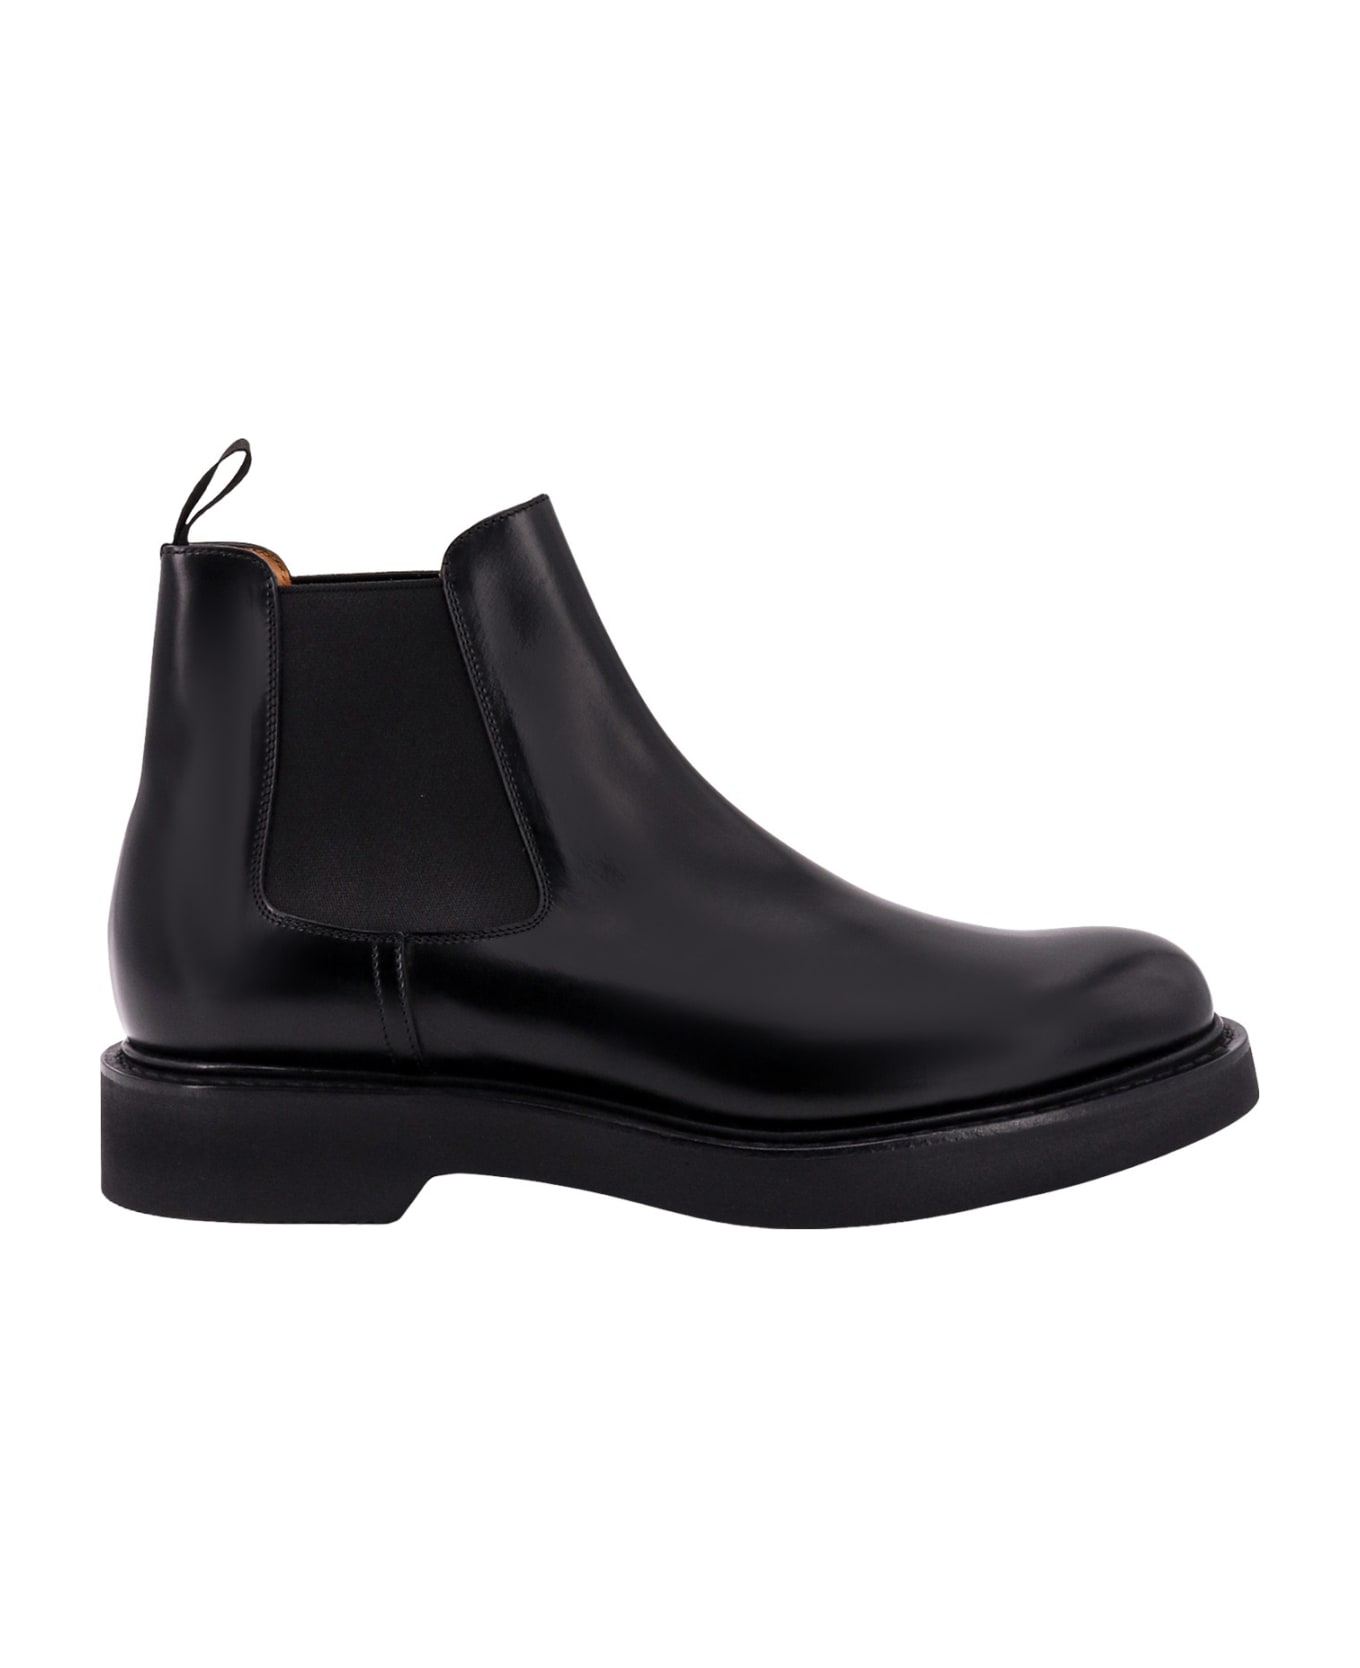 Church's Leicester Boots - Aab Black